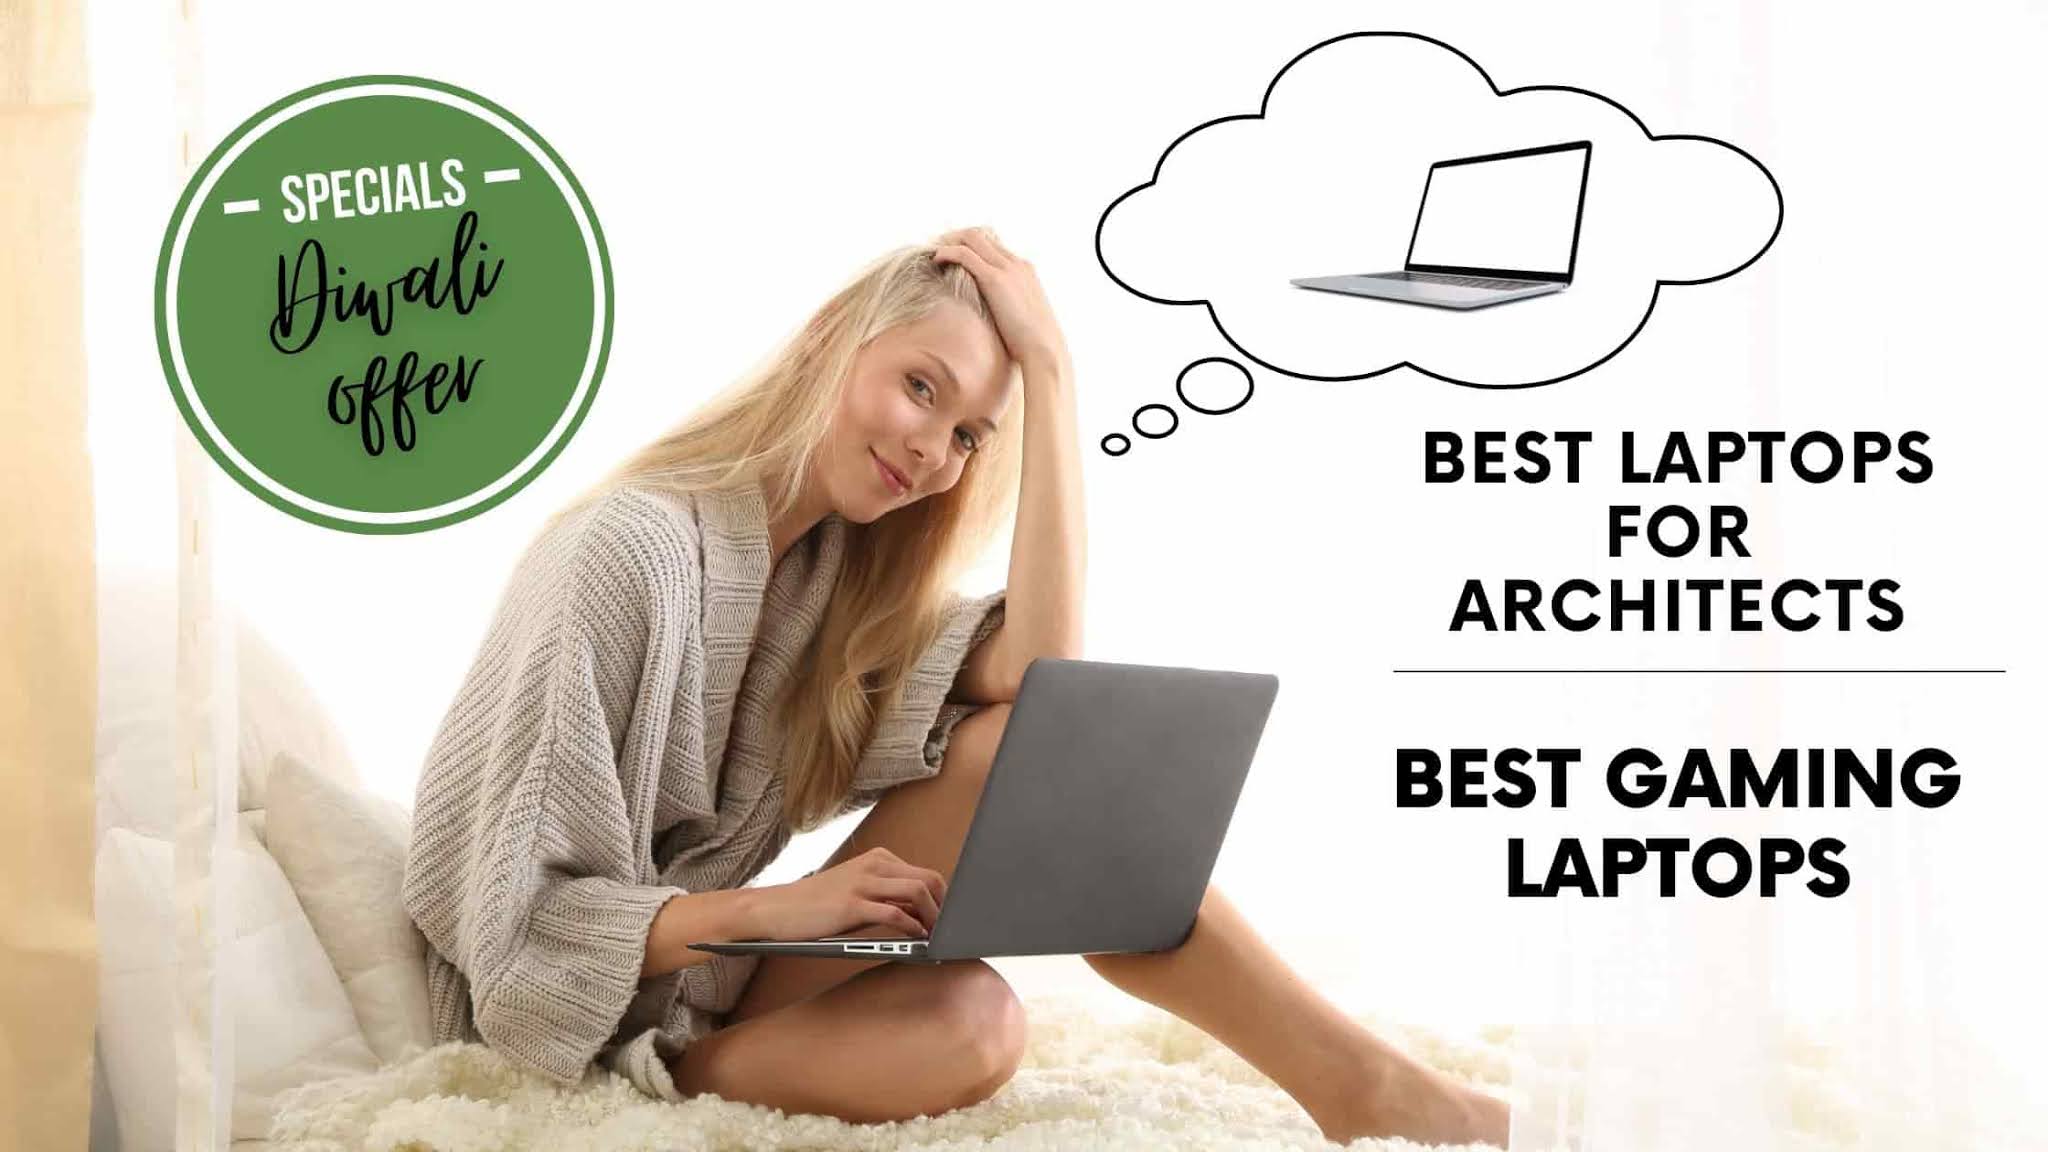 best-gaming-laptops,-best-gaming-laptops-under-70000,-best-gaming-laptops-under-80000,--best-gaming-laptops-under-90000,--best-gaming-laptps-to-buy,Best-Laptops-for-archi-students-in-india,-best-gaming-laptop-lightweight,-what's-the-best-gaming-laptop-brand,-best-gaming-laptop-list,-best-gaming-laptop-for-csgo,-best-gaming-laptop-linus-tech-tips,-best-gaming-laptop-name,